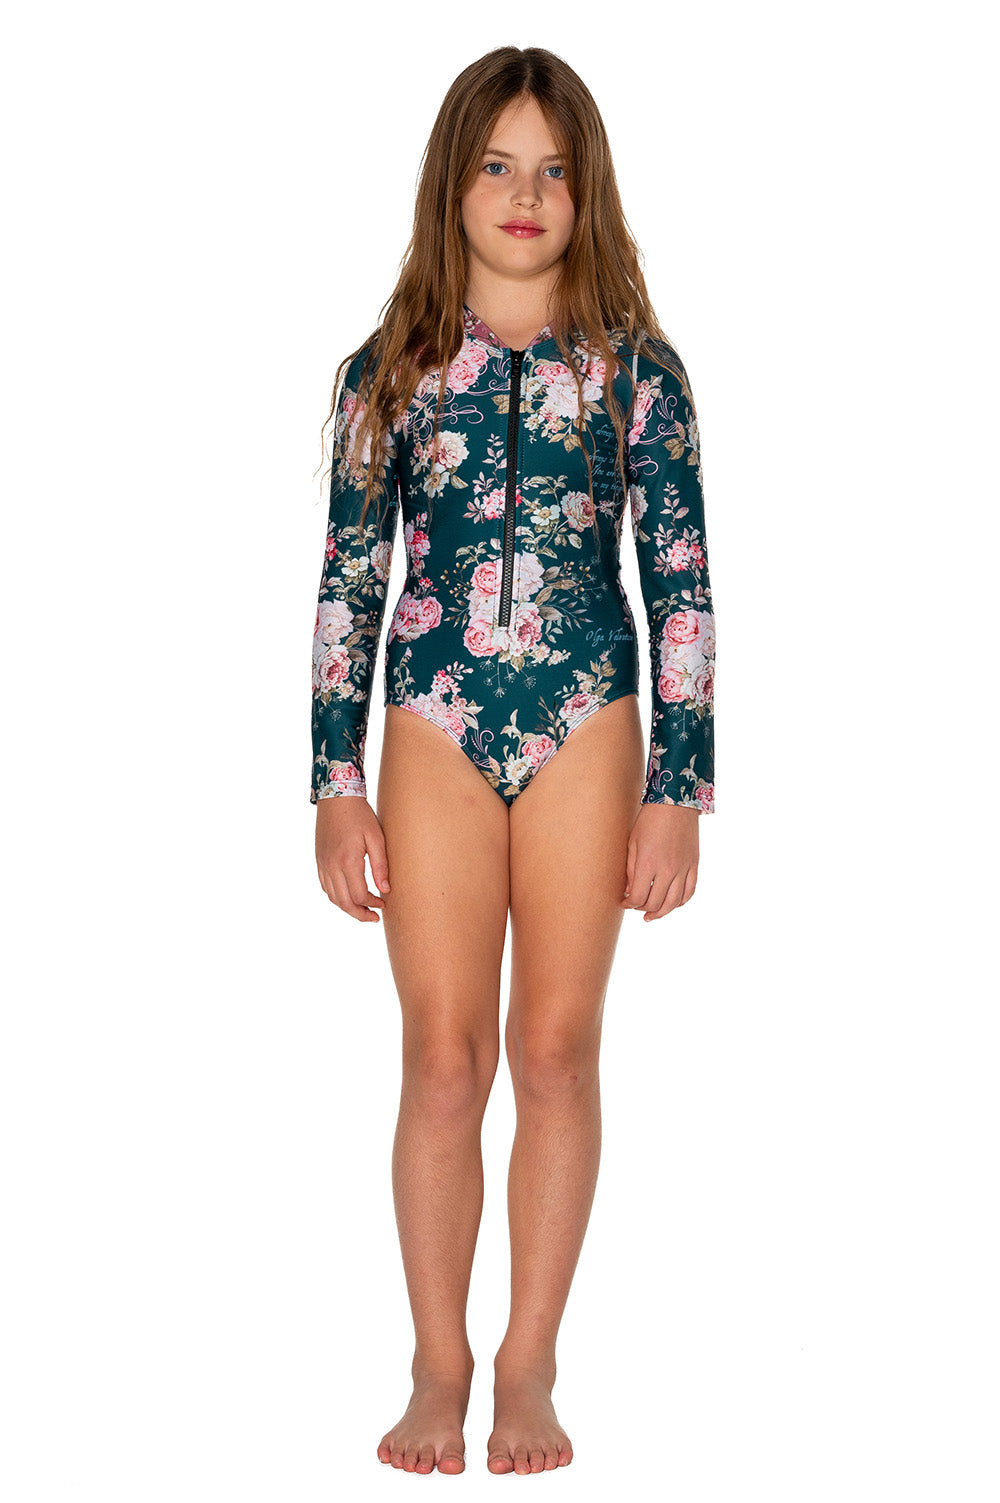 Girls Long Sleeve Swimsuit - Navy Blue Floral - Passionate - Front